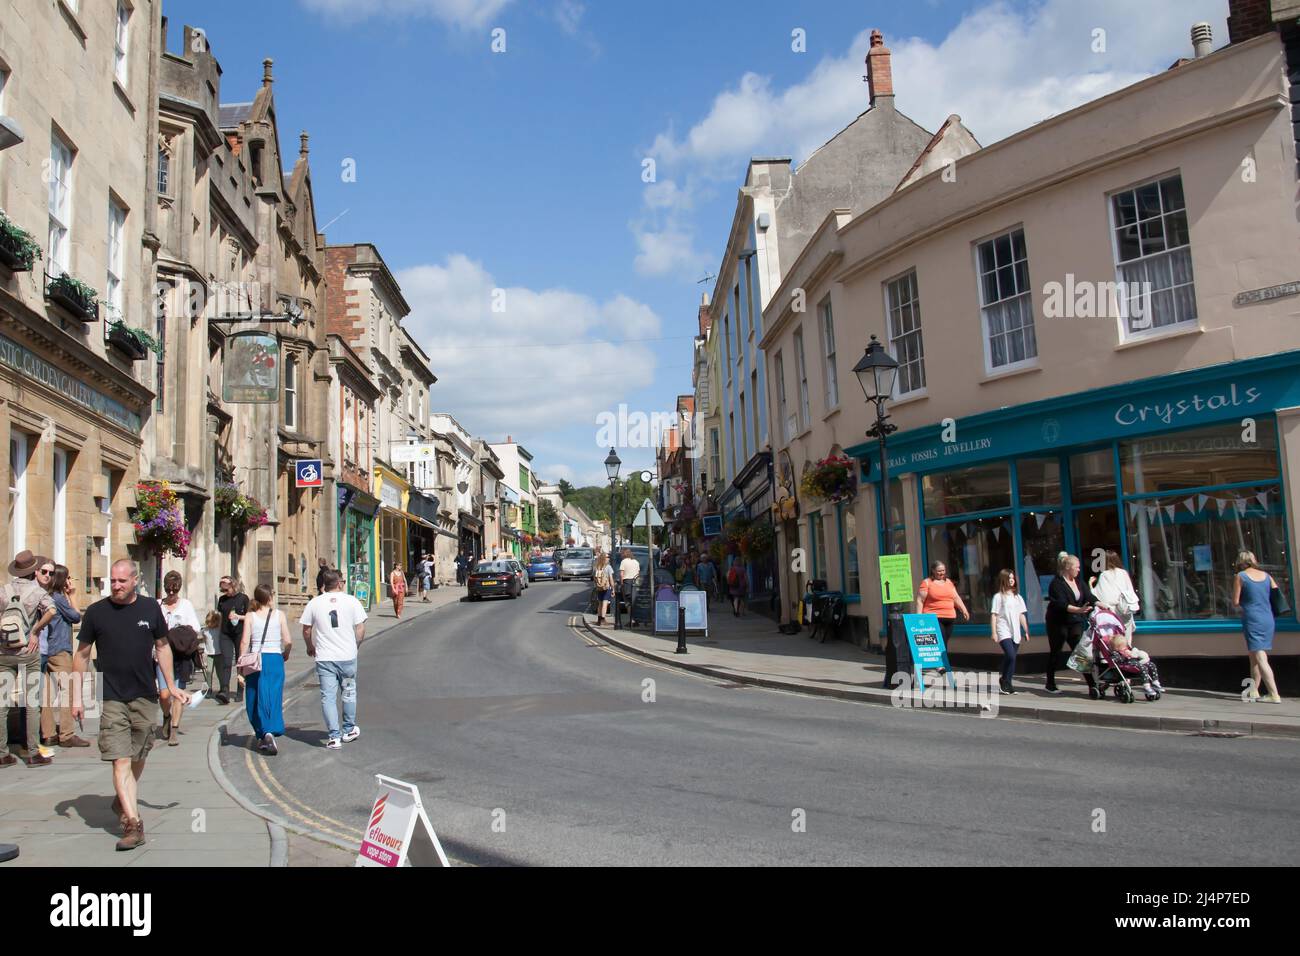 Views of shoppers on the High Street in Glastonbury, Somerset in the UK Stock Photo